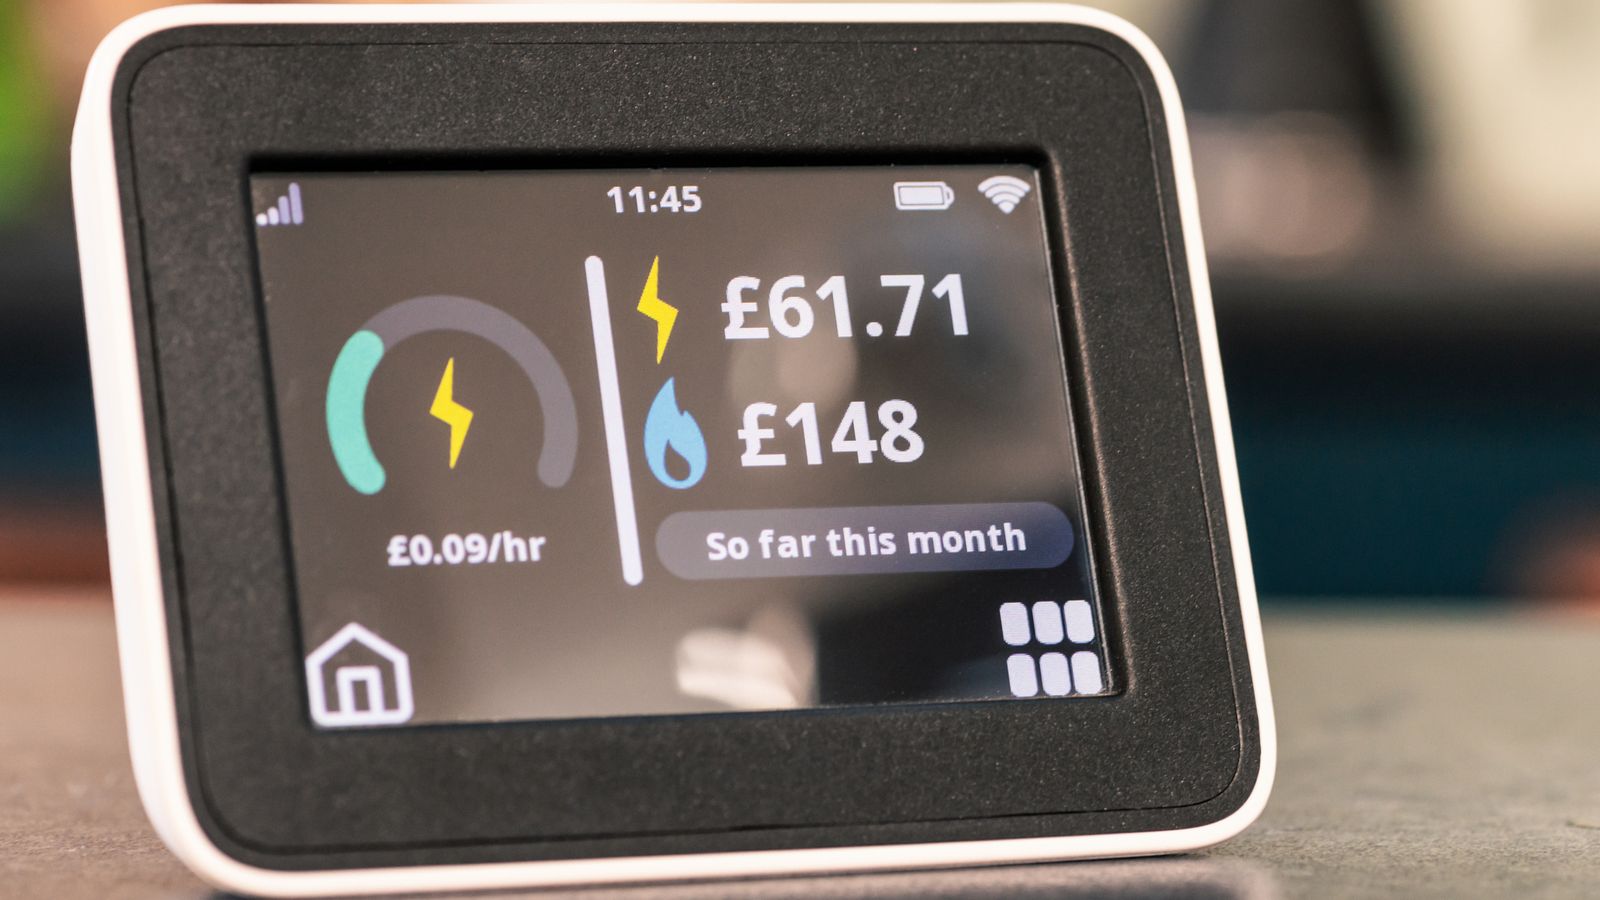 Major energy suppliers to pay £10.8m for not meeting smart meter targets